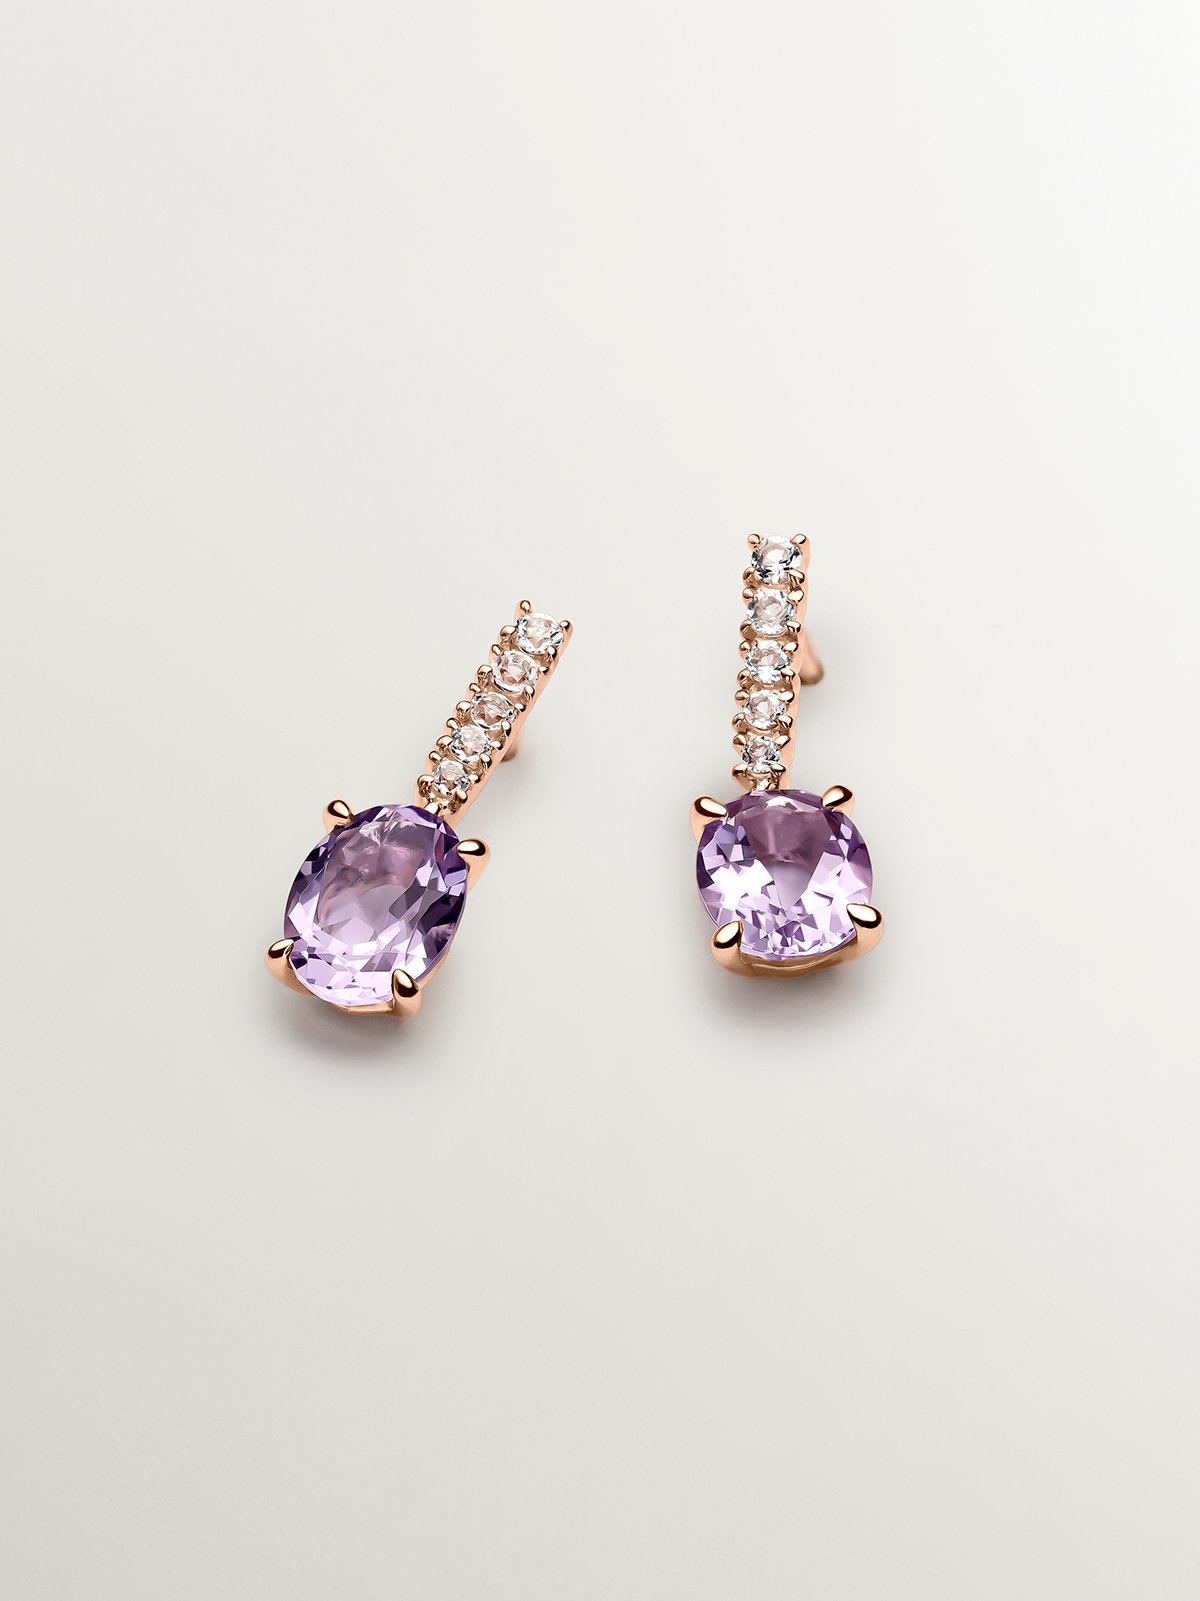 925 Silver Earrings plated in 18K rose gold with purple amethyst and white topaz